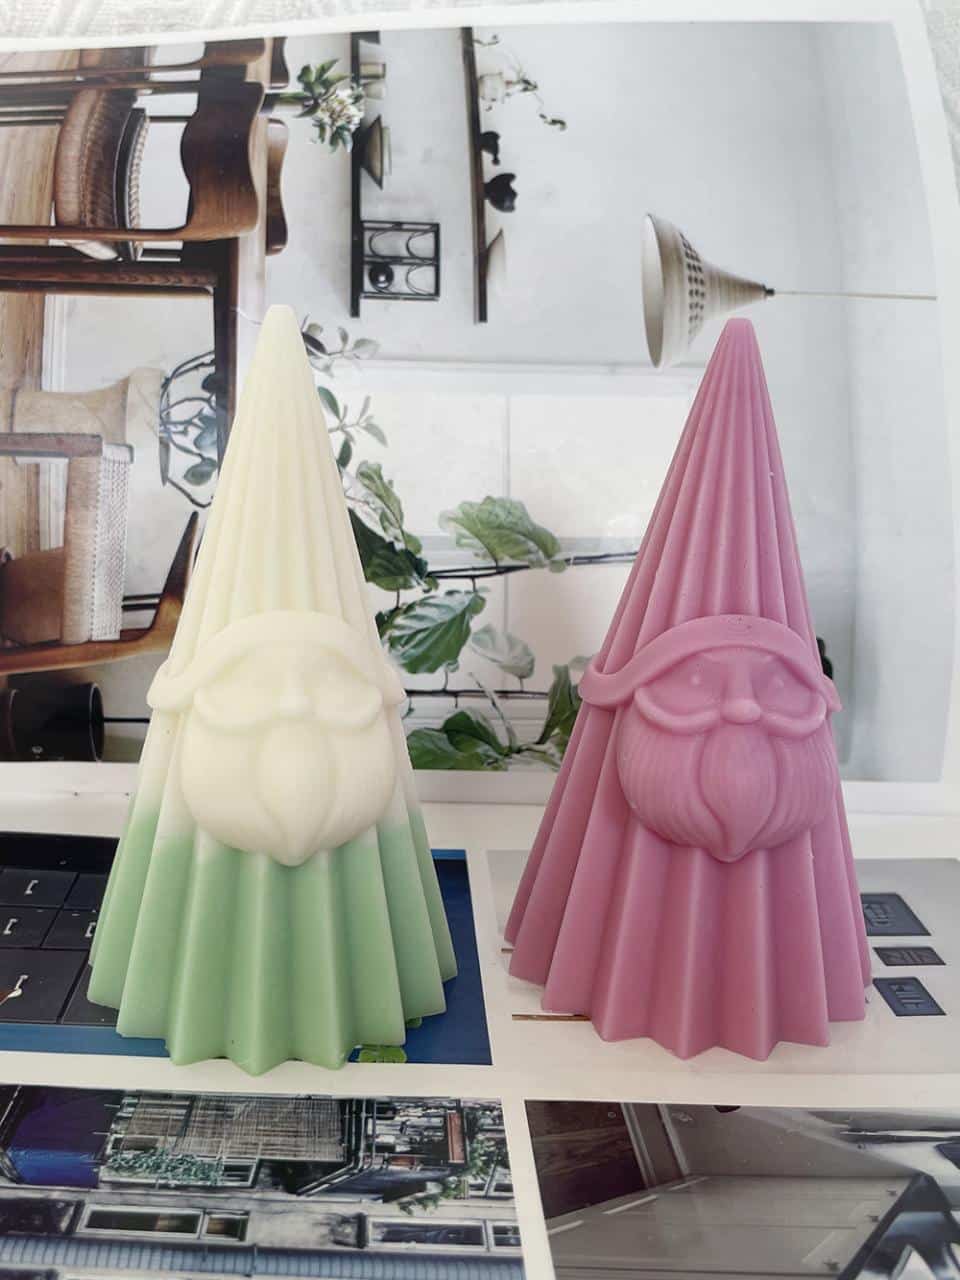 3D Santa Claus Aromatherapy Candle Silicone Mold Christmas Pie Gift Vertical Pattern Conical Santa Claus Gypsum Decoration Mold 8662L - Silicone Mold - 5